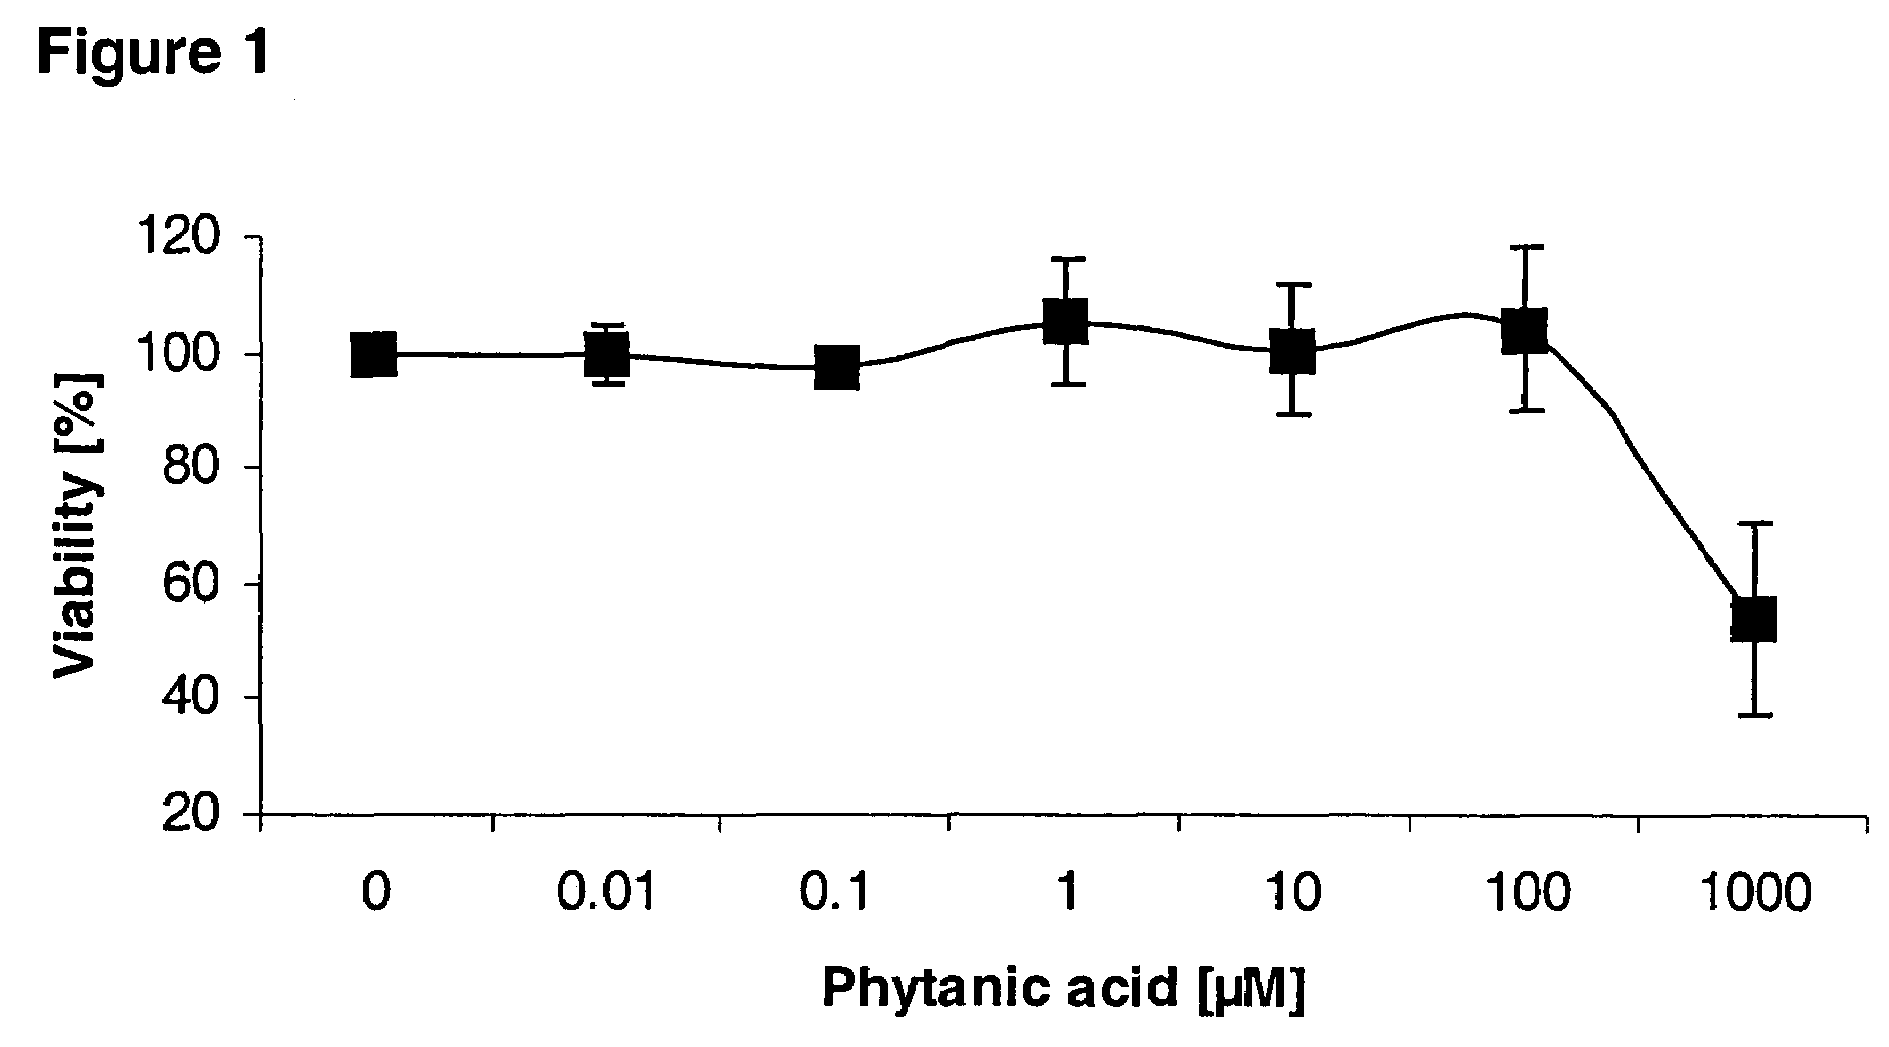 Method of treating non-insulin dependent diabetes mellitus with phytanic acid derivatives